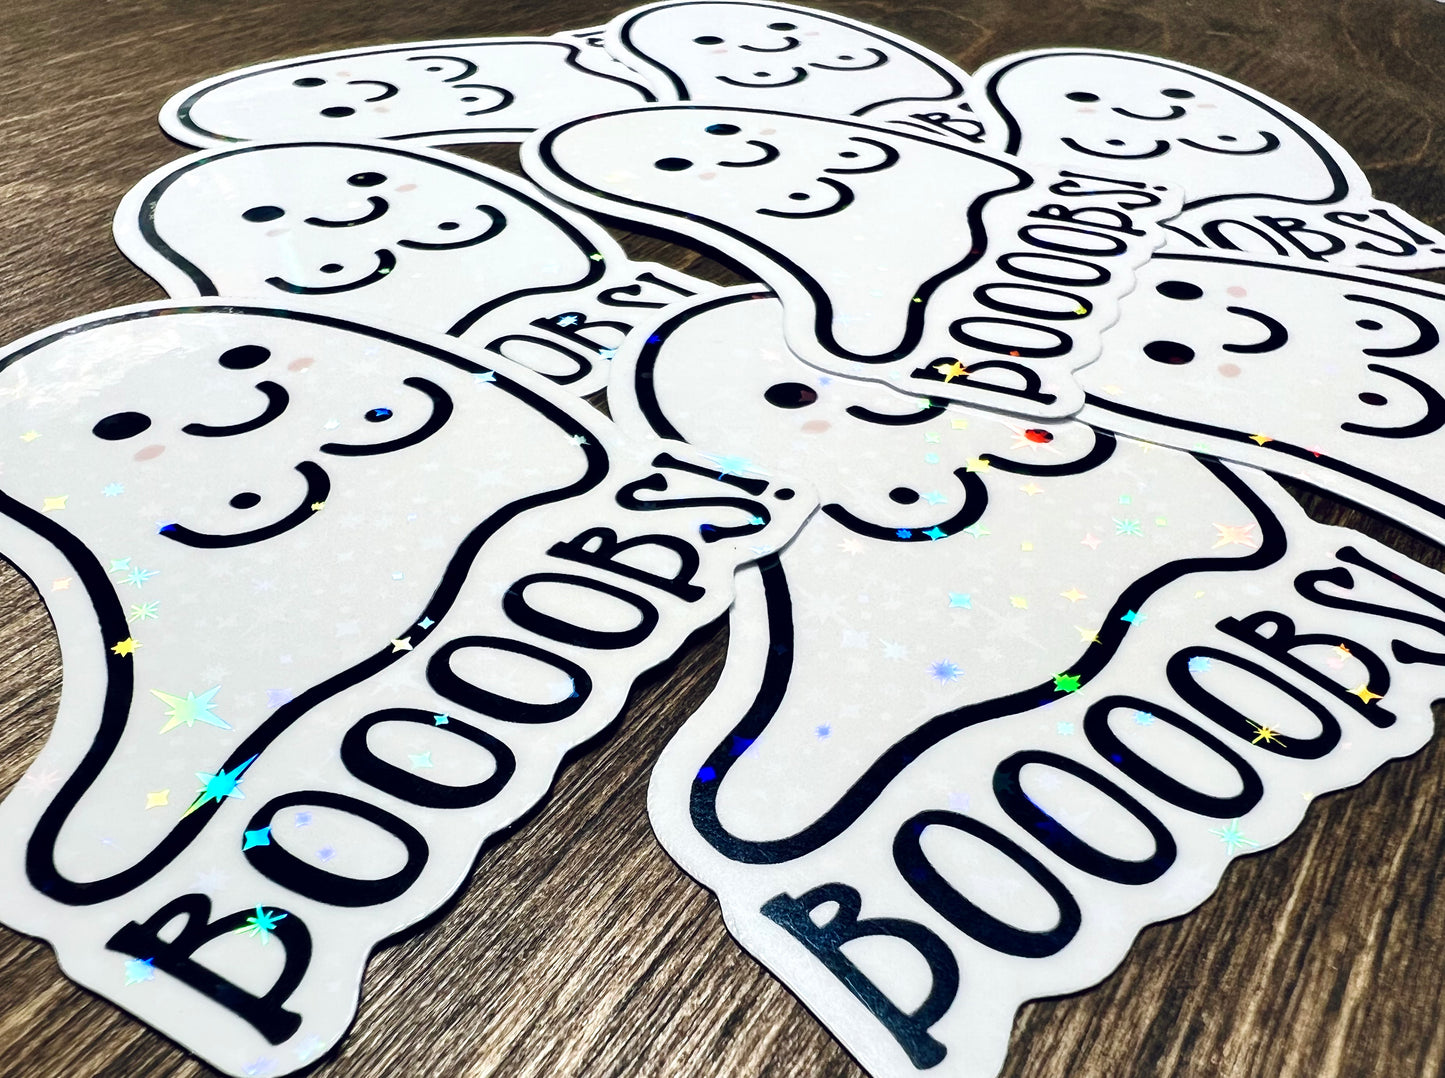 Funny Ghost Vinyl Sticker - Holographic